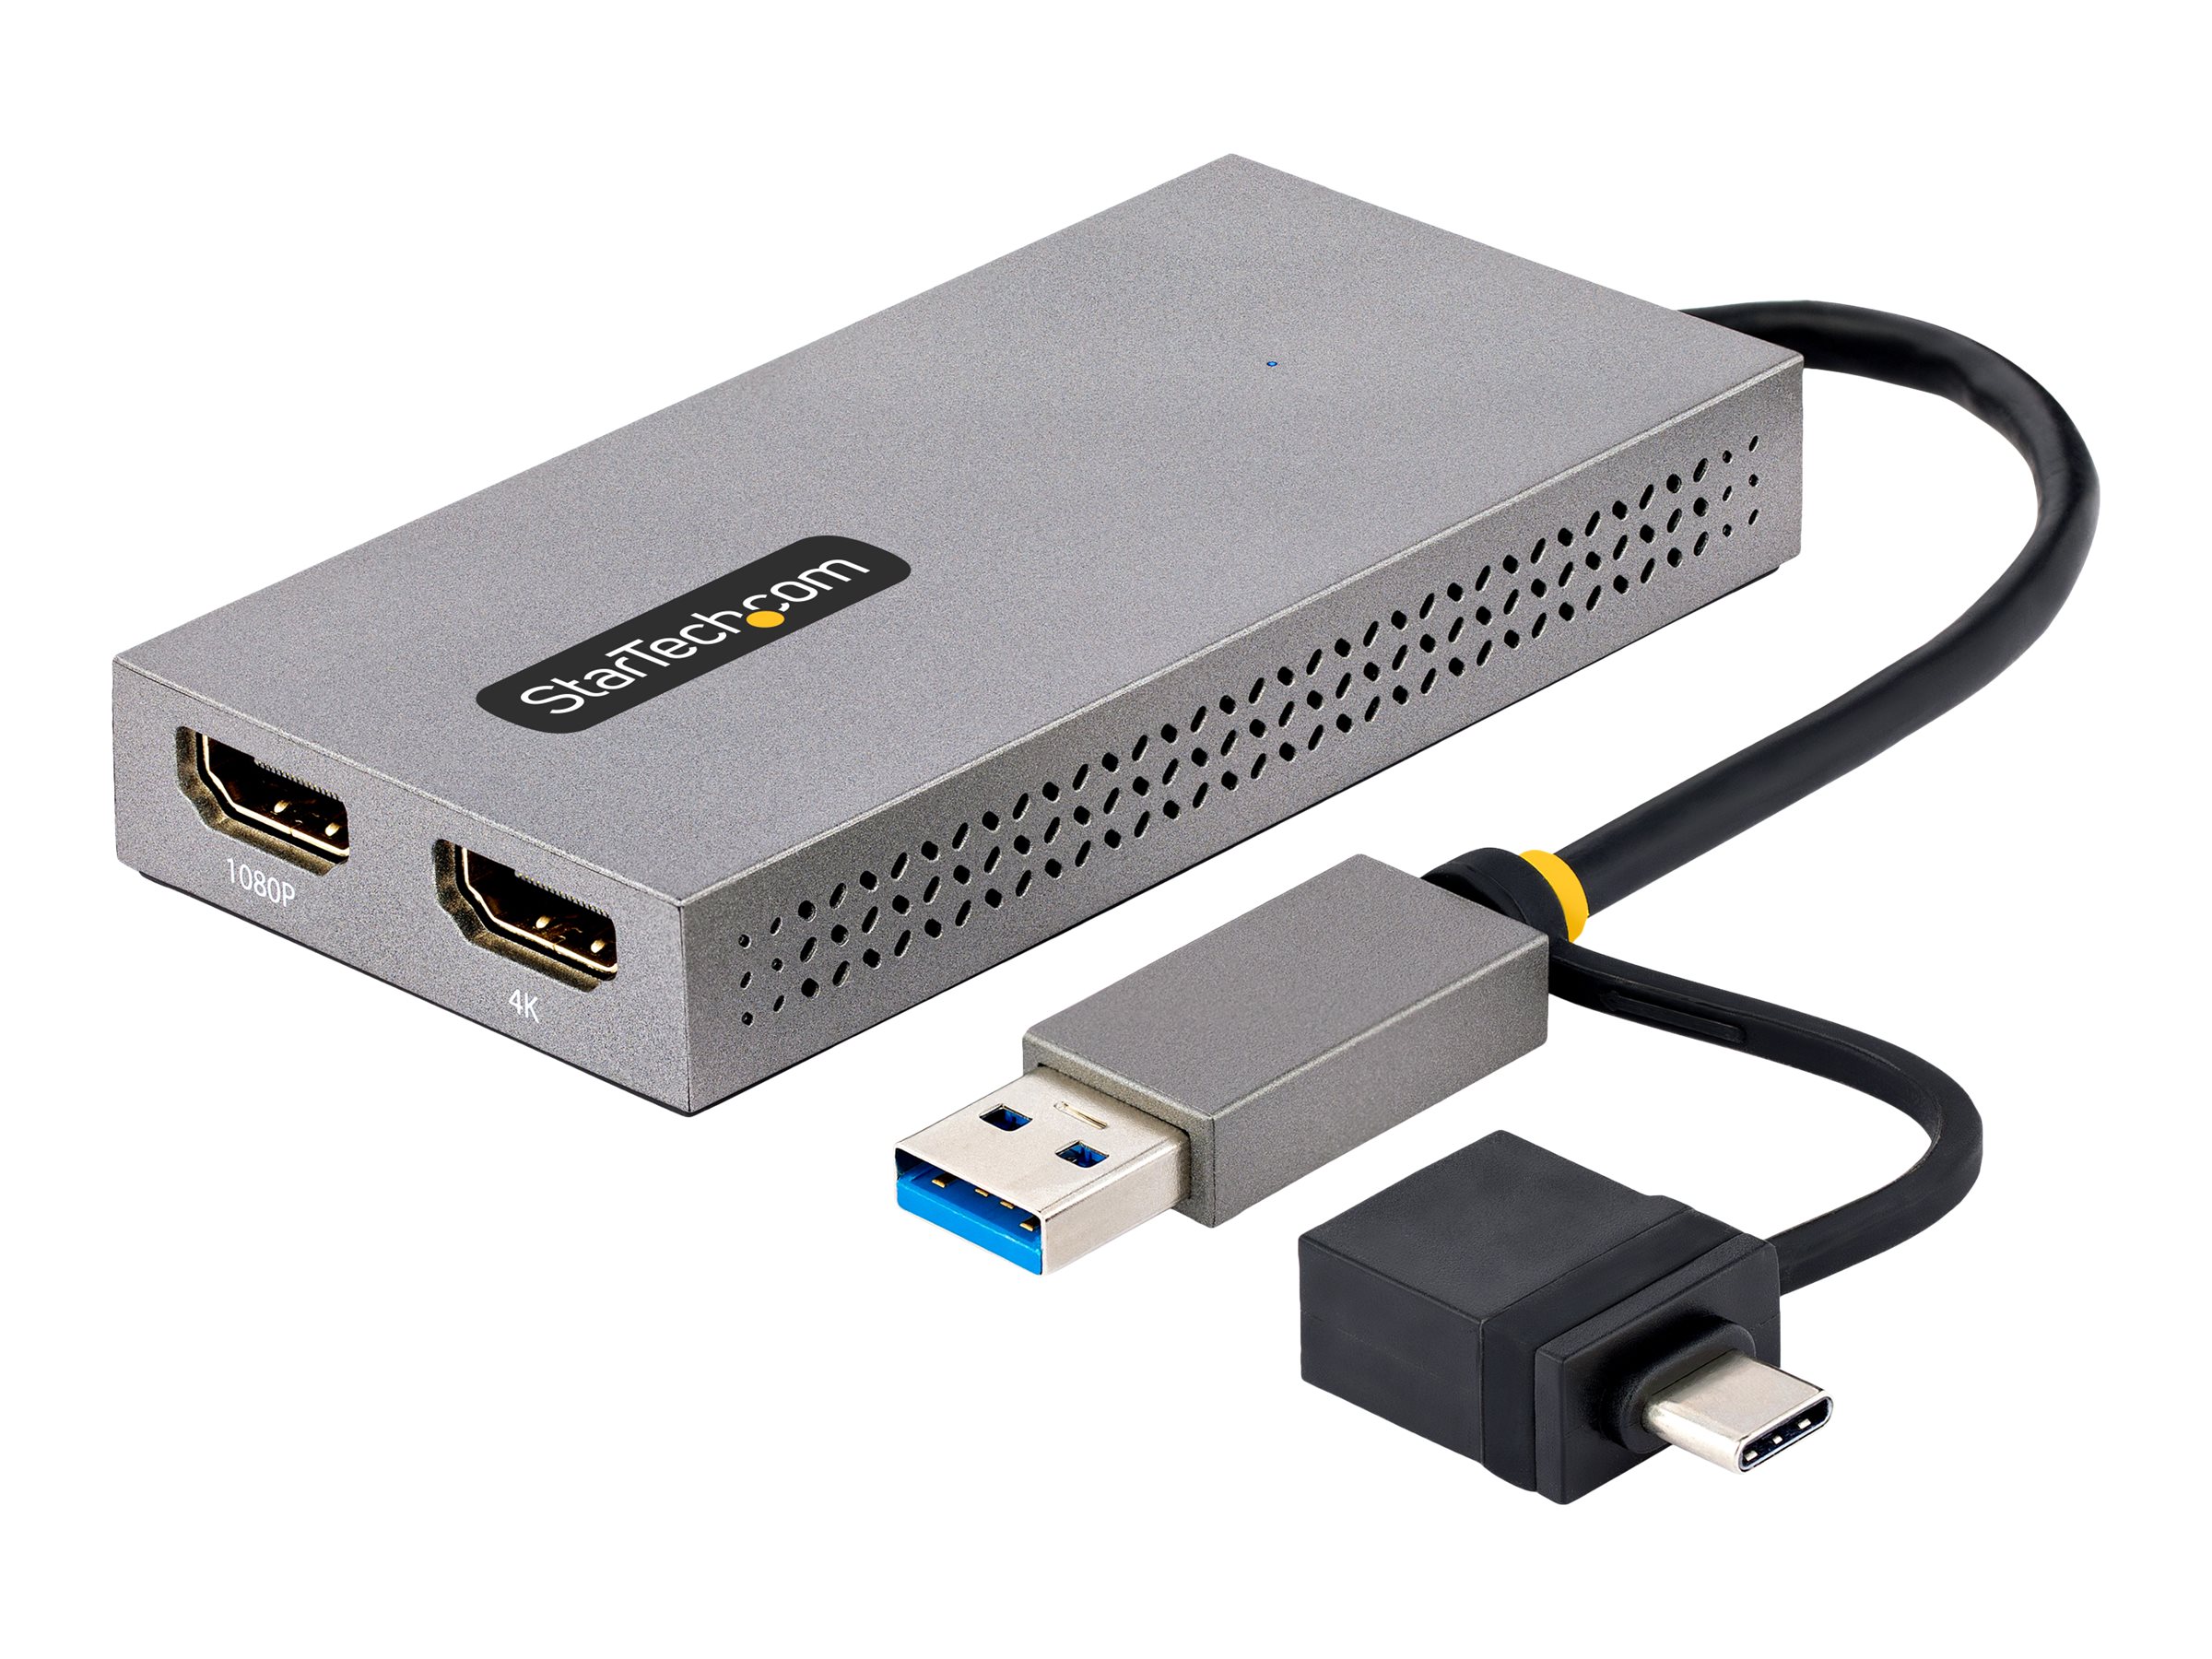 USB to Dual HDMI Adapter USB A/C to 2x HDMI Displays 1x 4K 30Hz 1x 1080p USB 3.0 to HDMI Converter 4in/11cm Cable